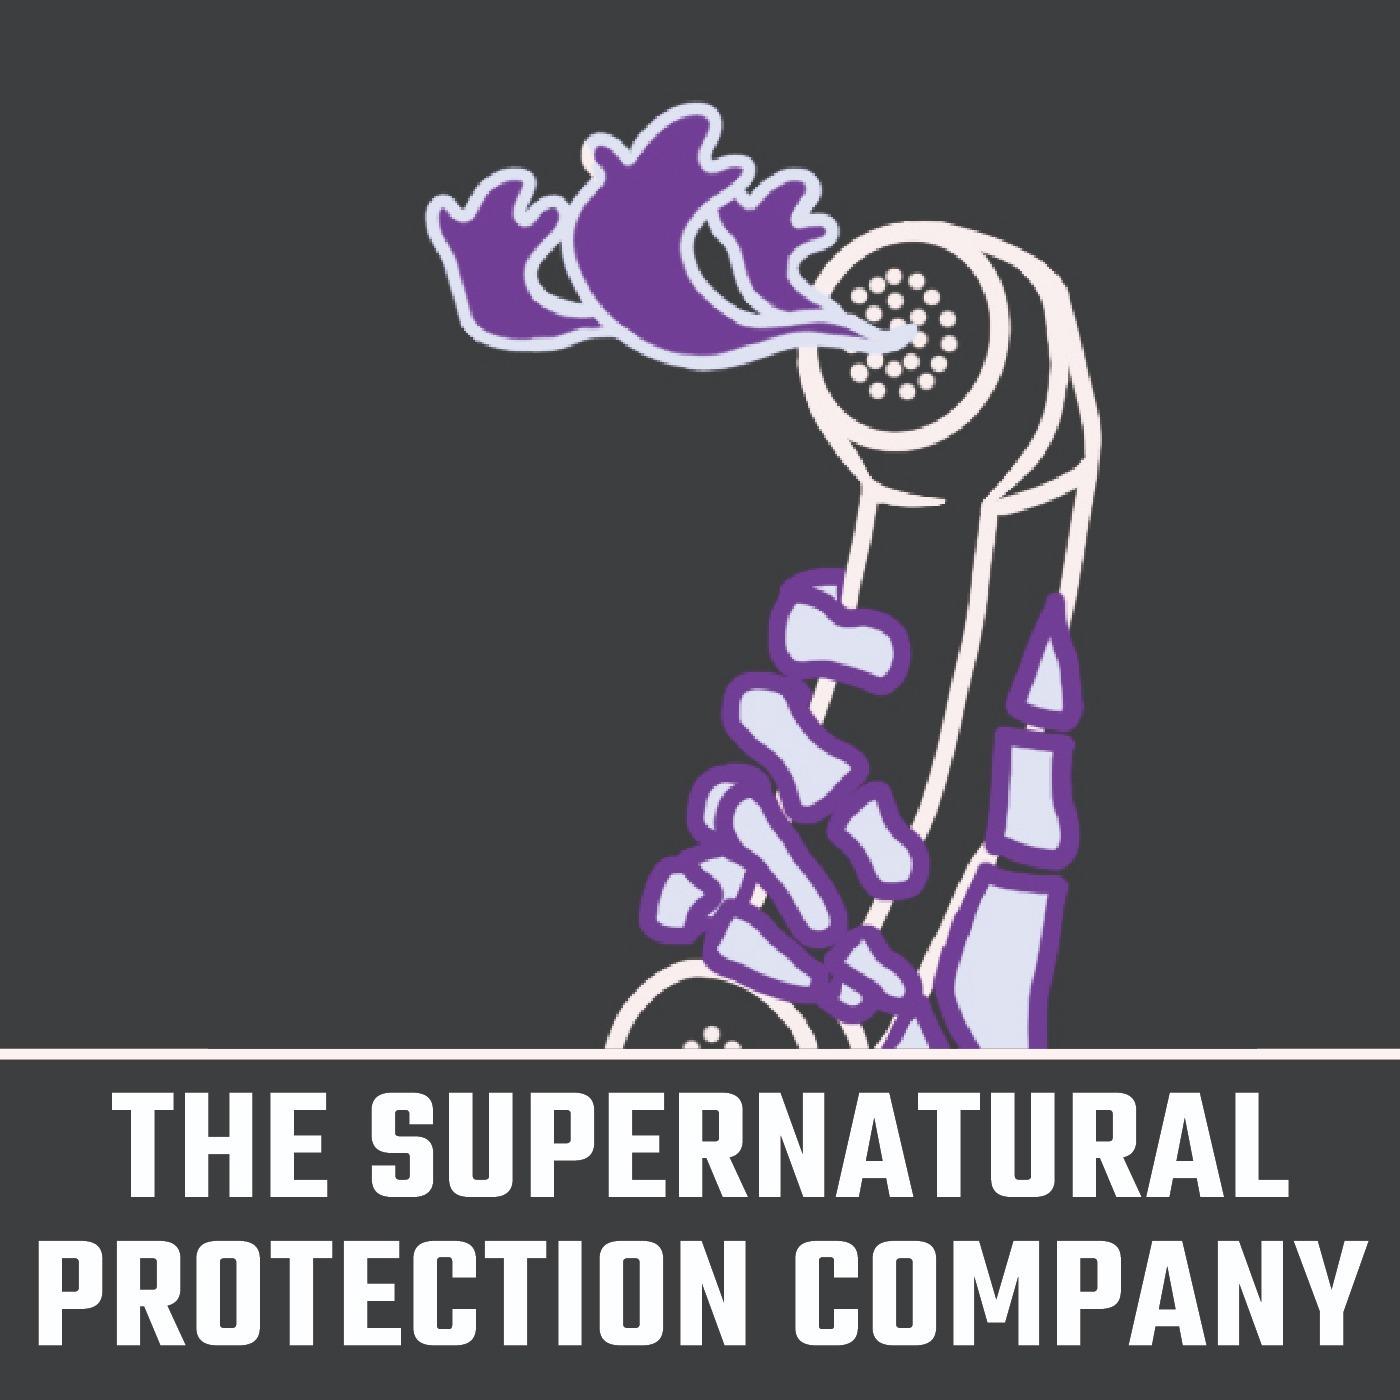 The Supernatural Protection Company